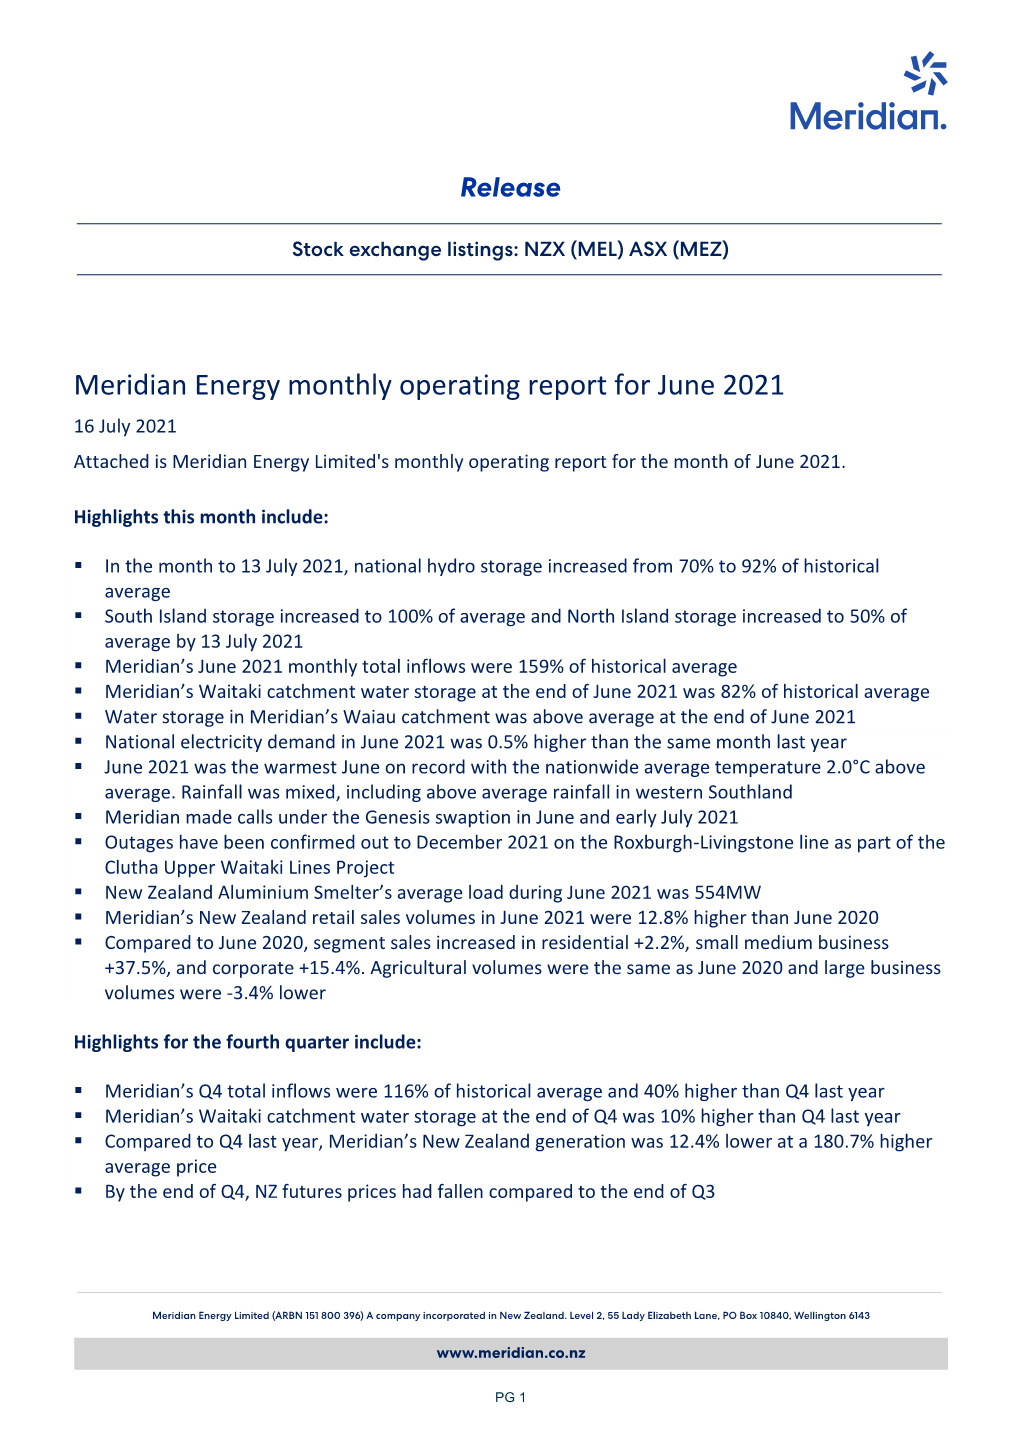 Meridian Energy Monthly Operating Report for June 2021 16 July 2021 Attached Is Meridian Energy Limited's Monthly Operating Report for the Month of June 2021